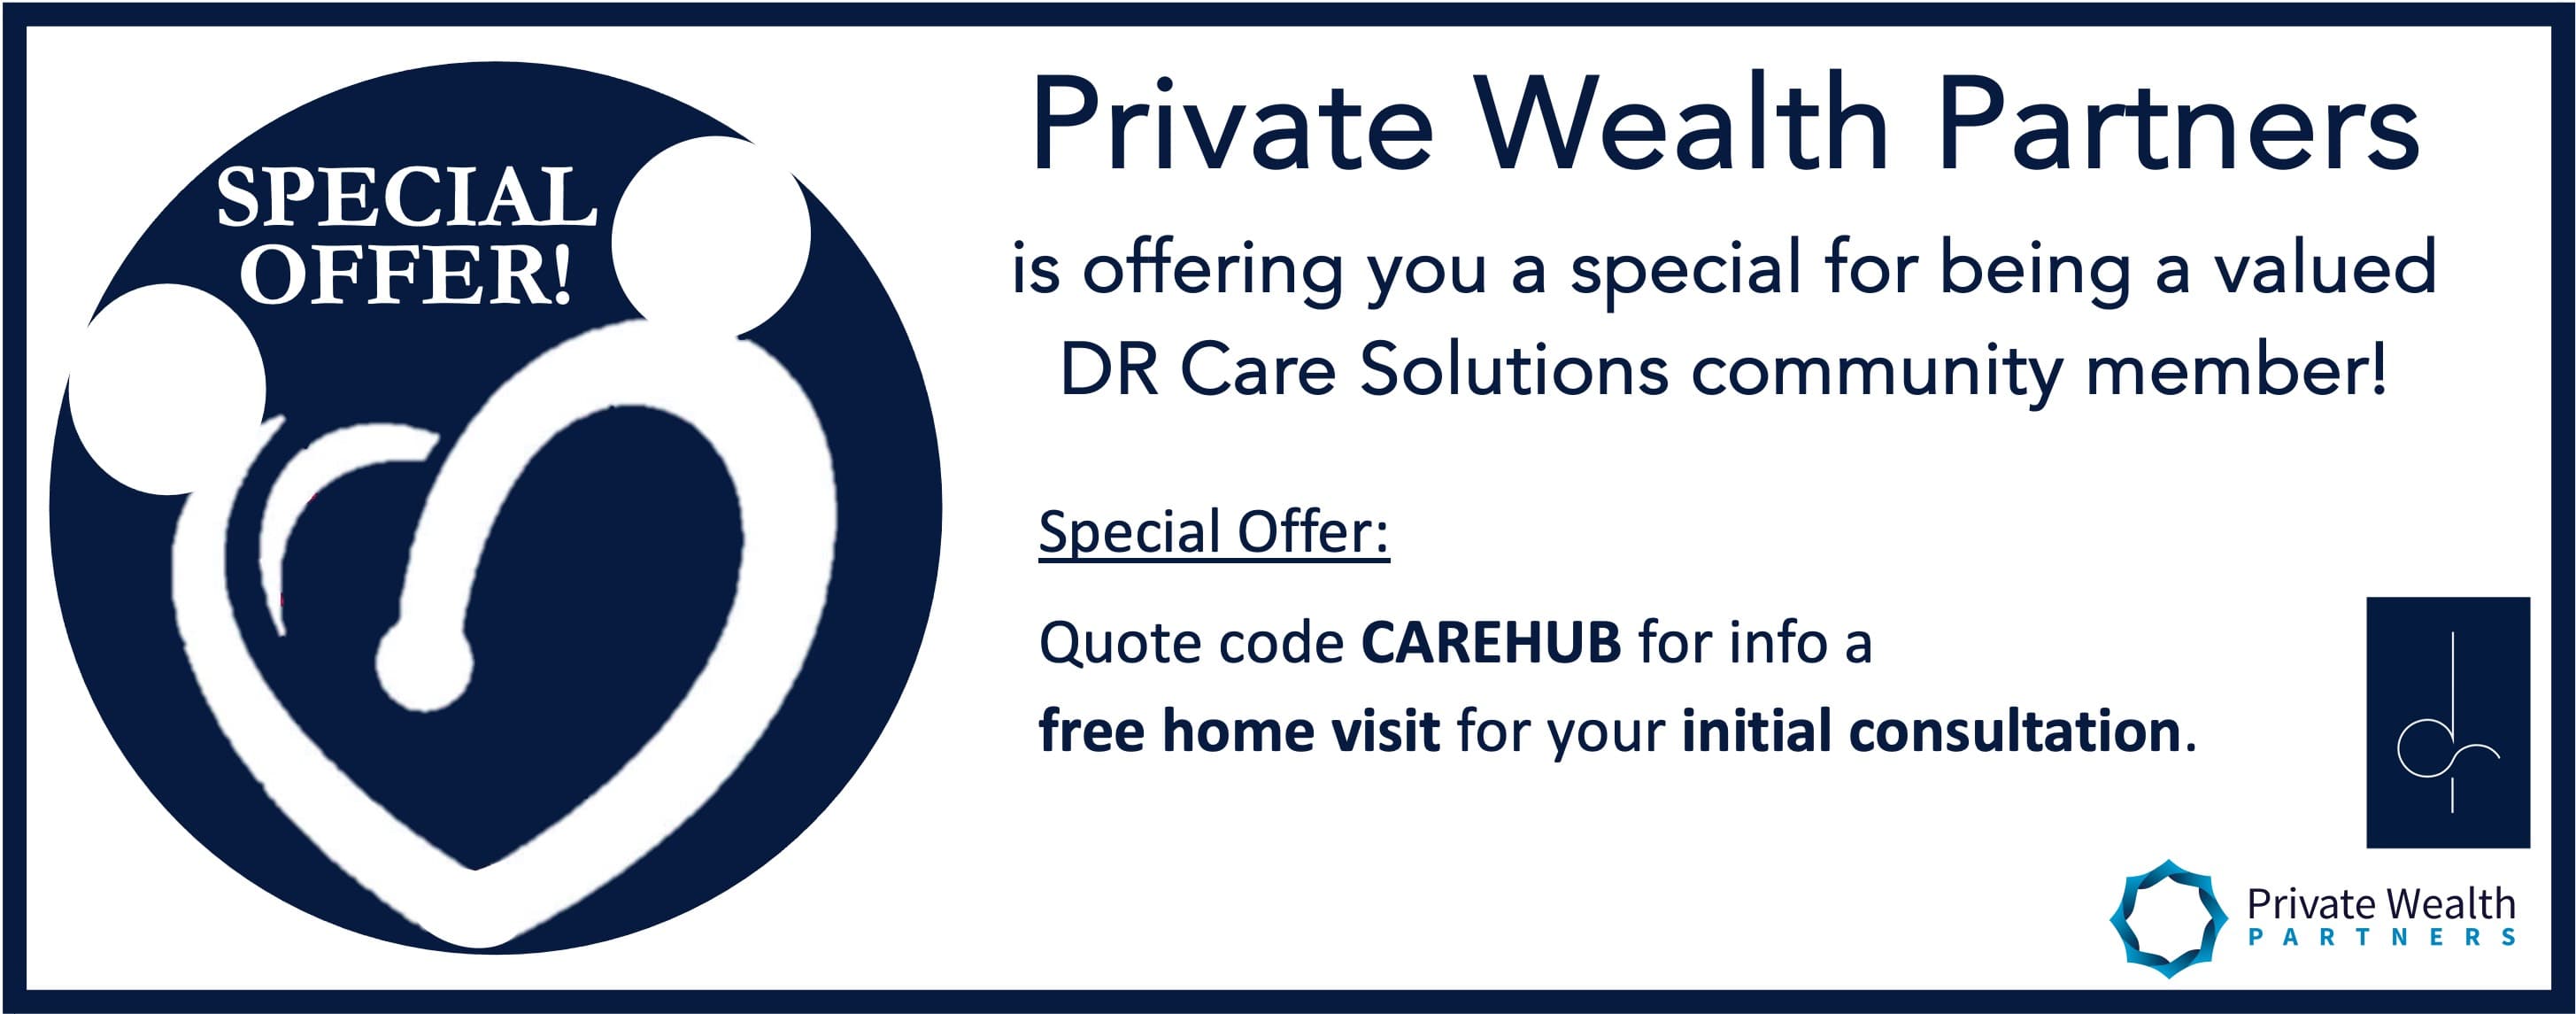 Private Wealth Partners - Special Offer